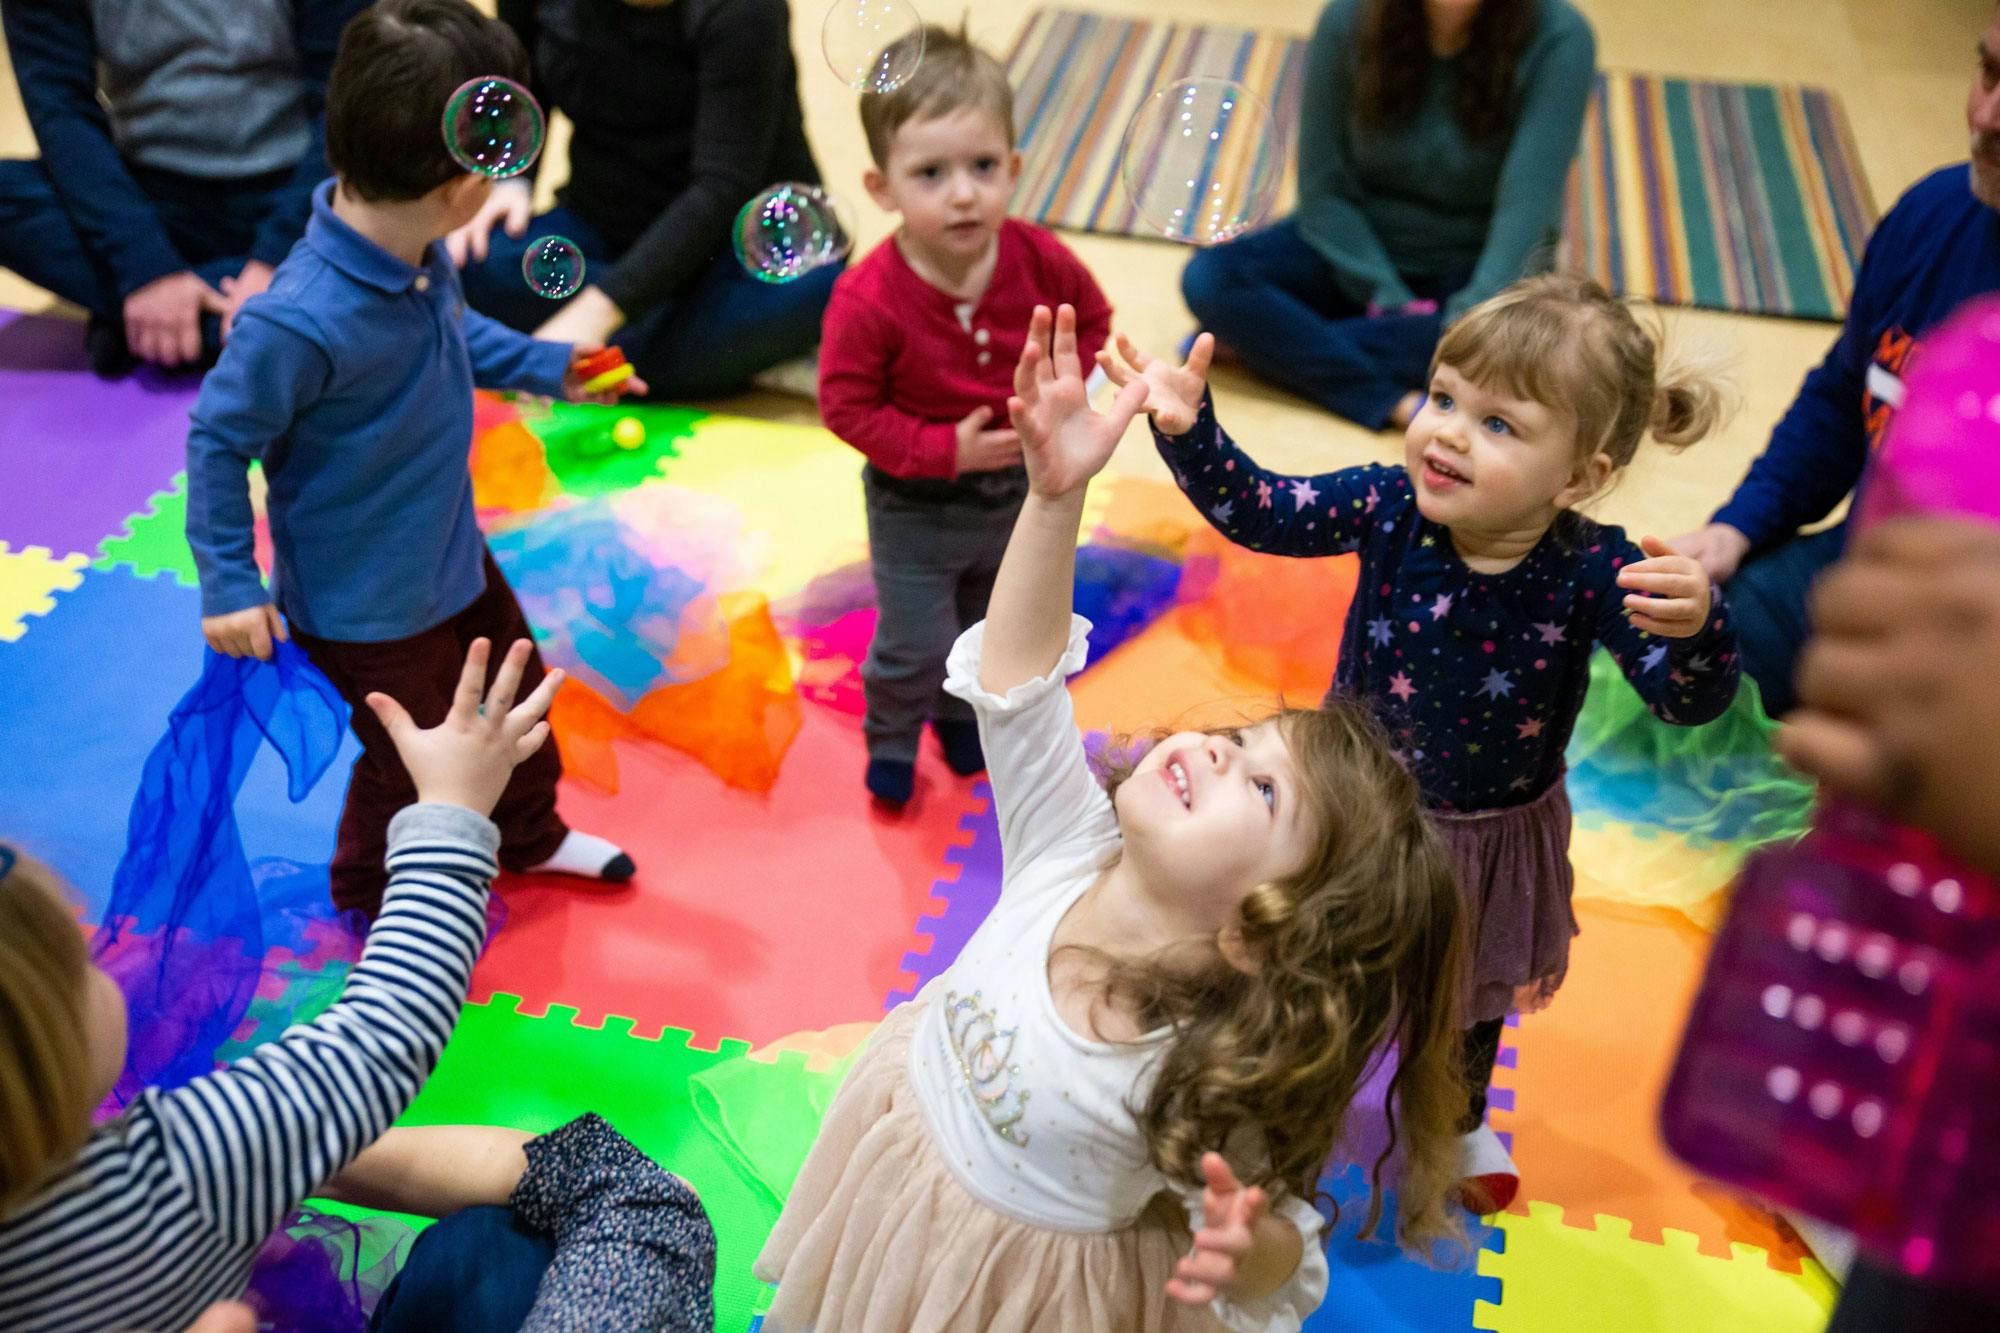 Five young children reach for bubbles above them. The floor is covered in soft, colorful tiles.